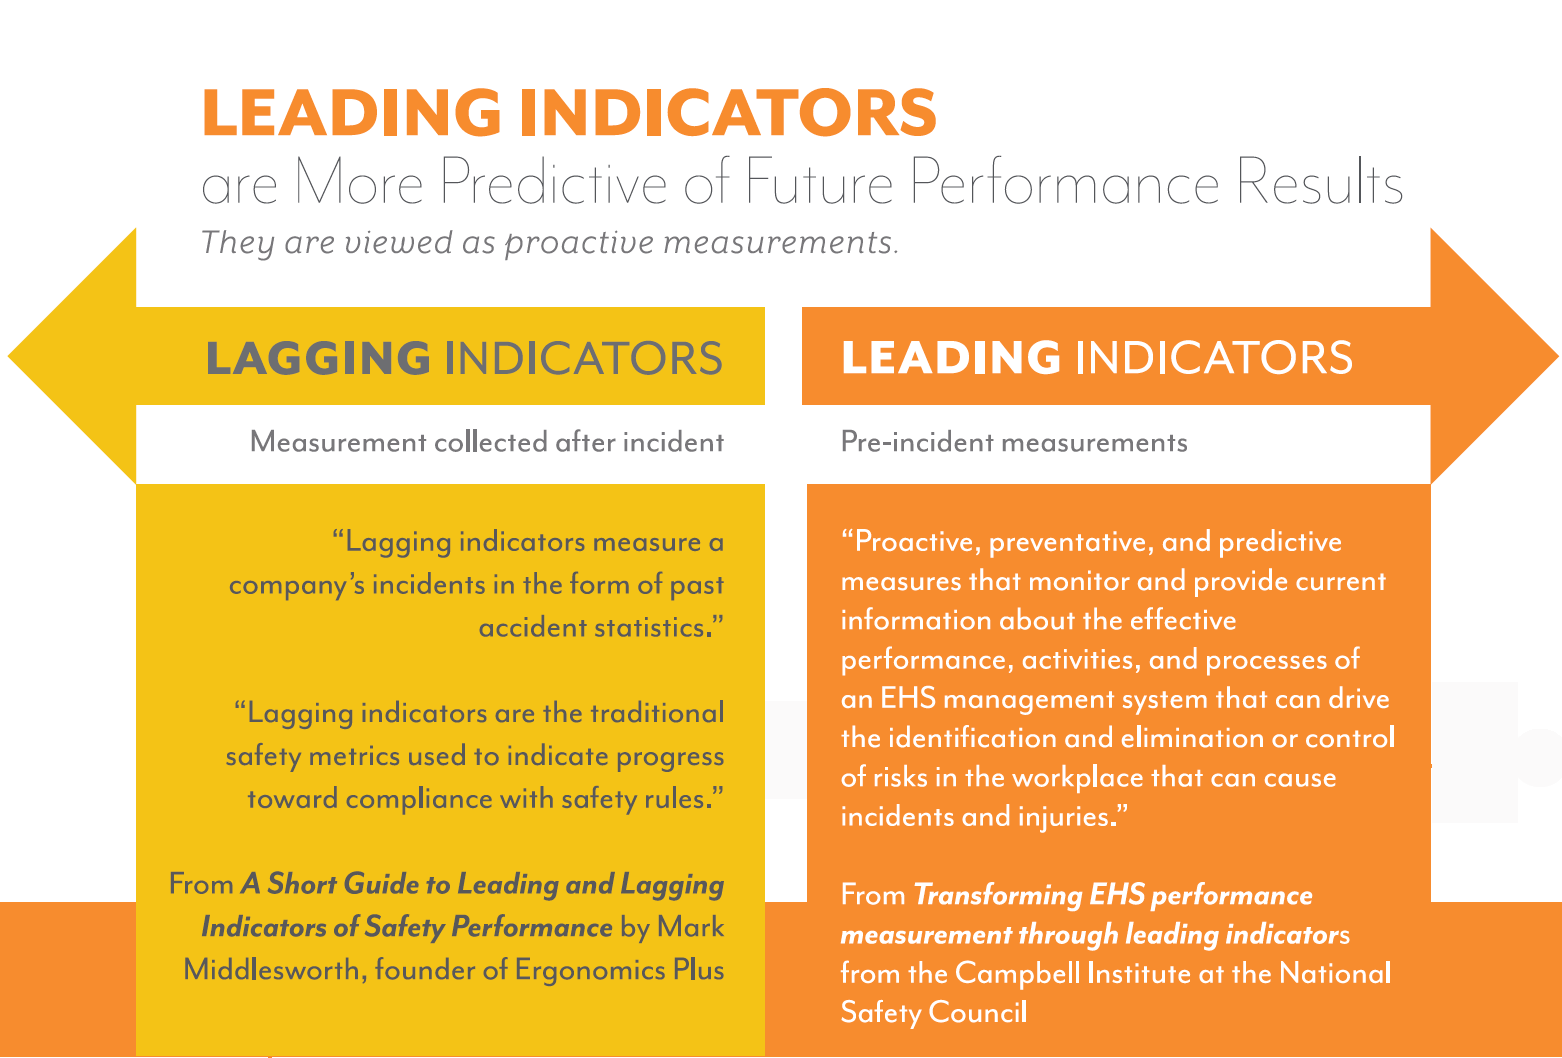 Quality performance. Leading indicators. Proactive Safety Management System. To/from indicators. Leading indicators examples.